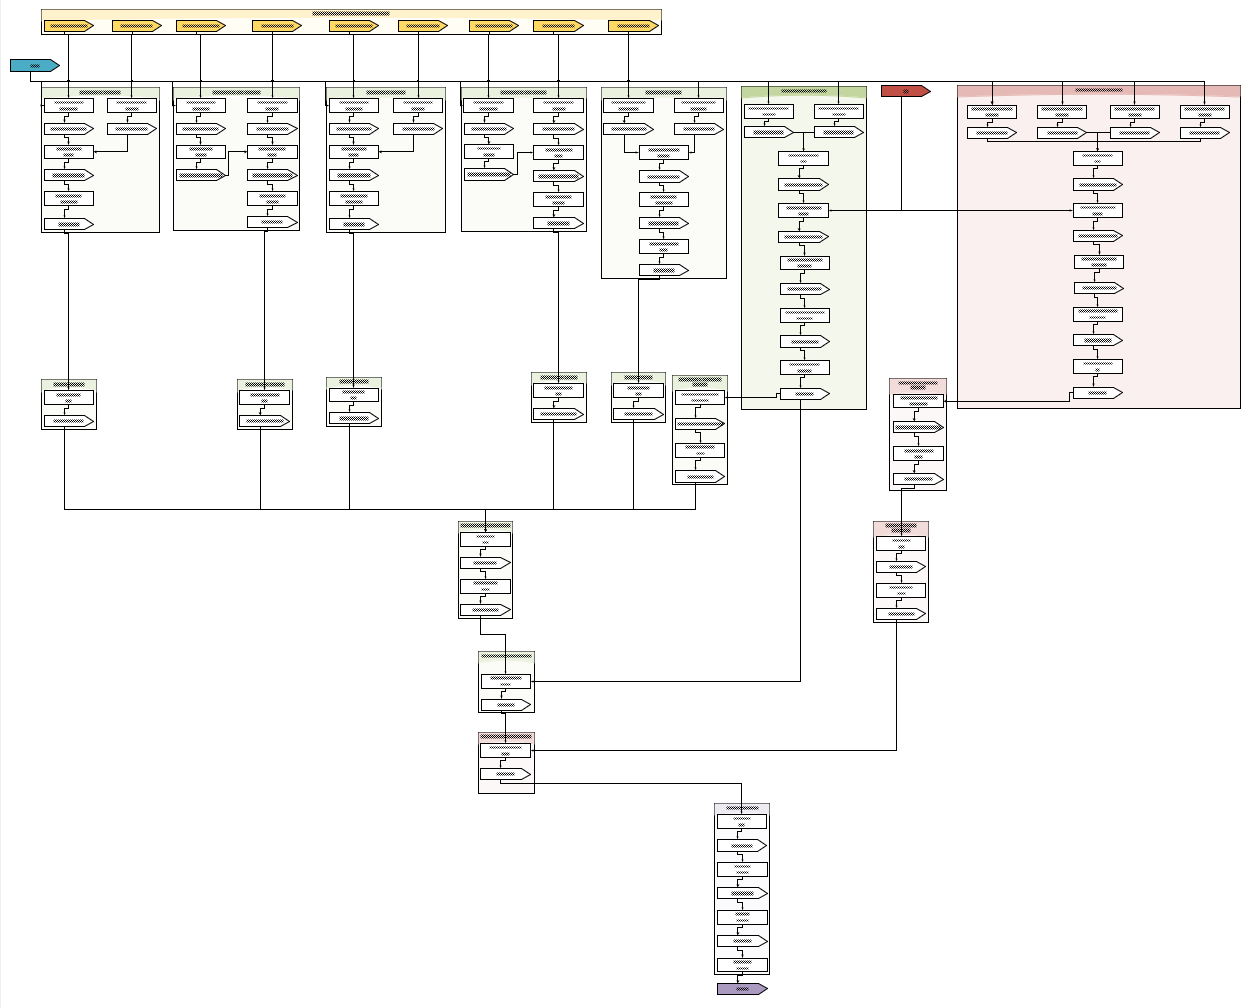 A process flowchart with more than 50 applications and about 70 datasets